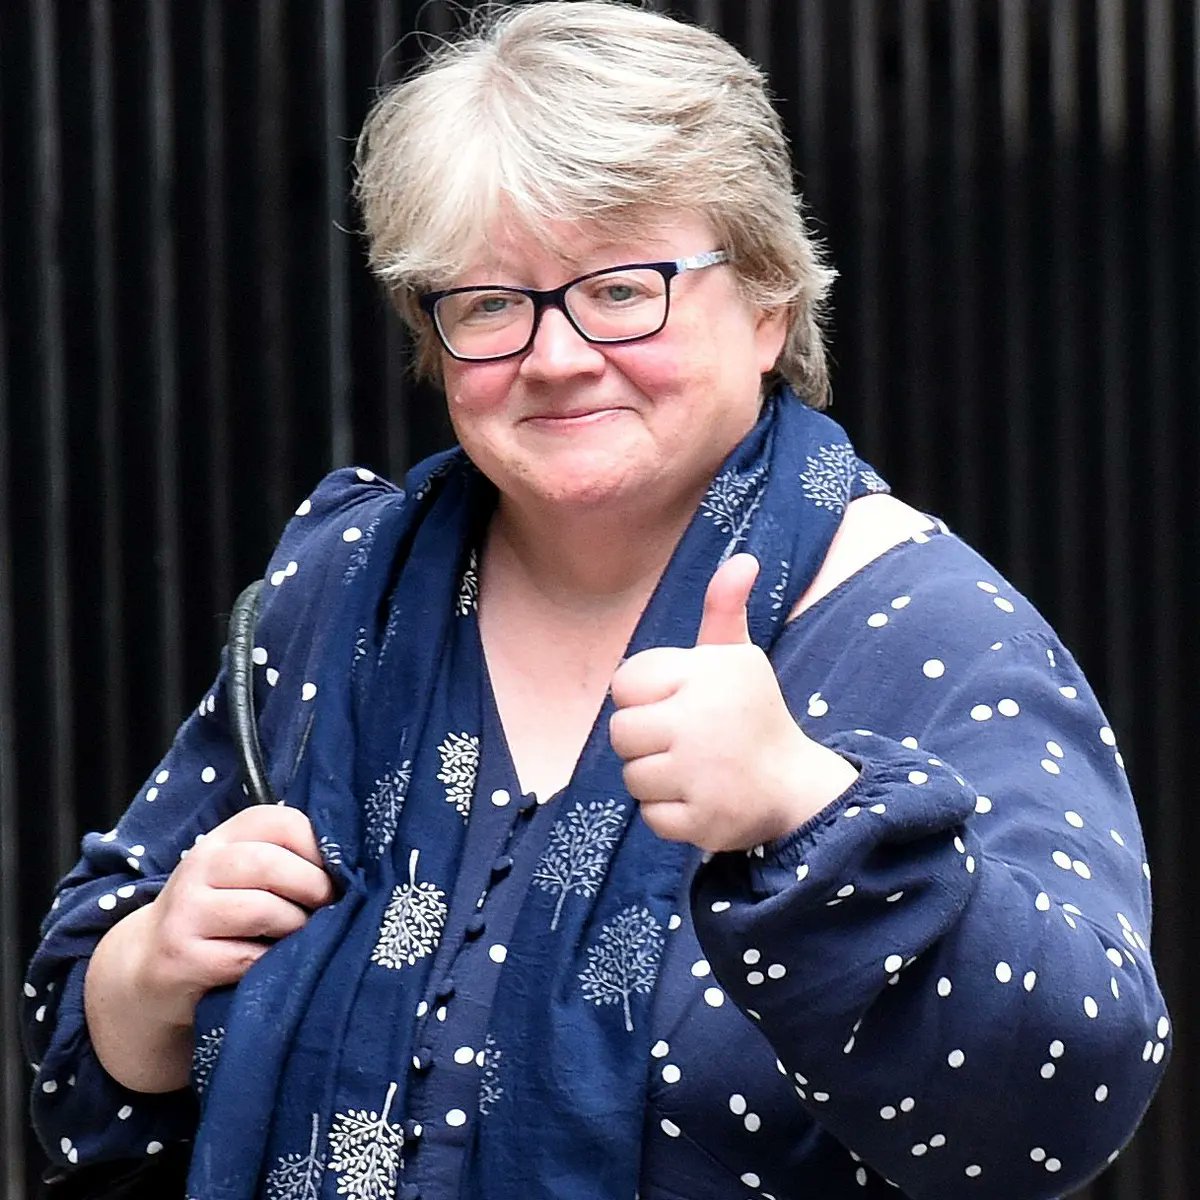 Therese Coffey was paid £156,000 and claimed £200,000+ in expenses, including £22k rent, and £3,088 to pay to the ERG. When she said the solution to the Cost of Living Crisis was to work more hours.